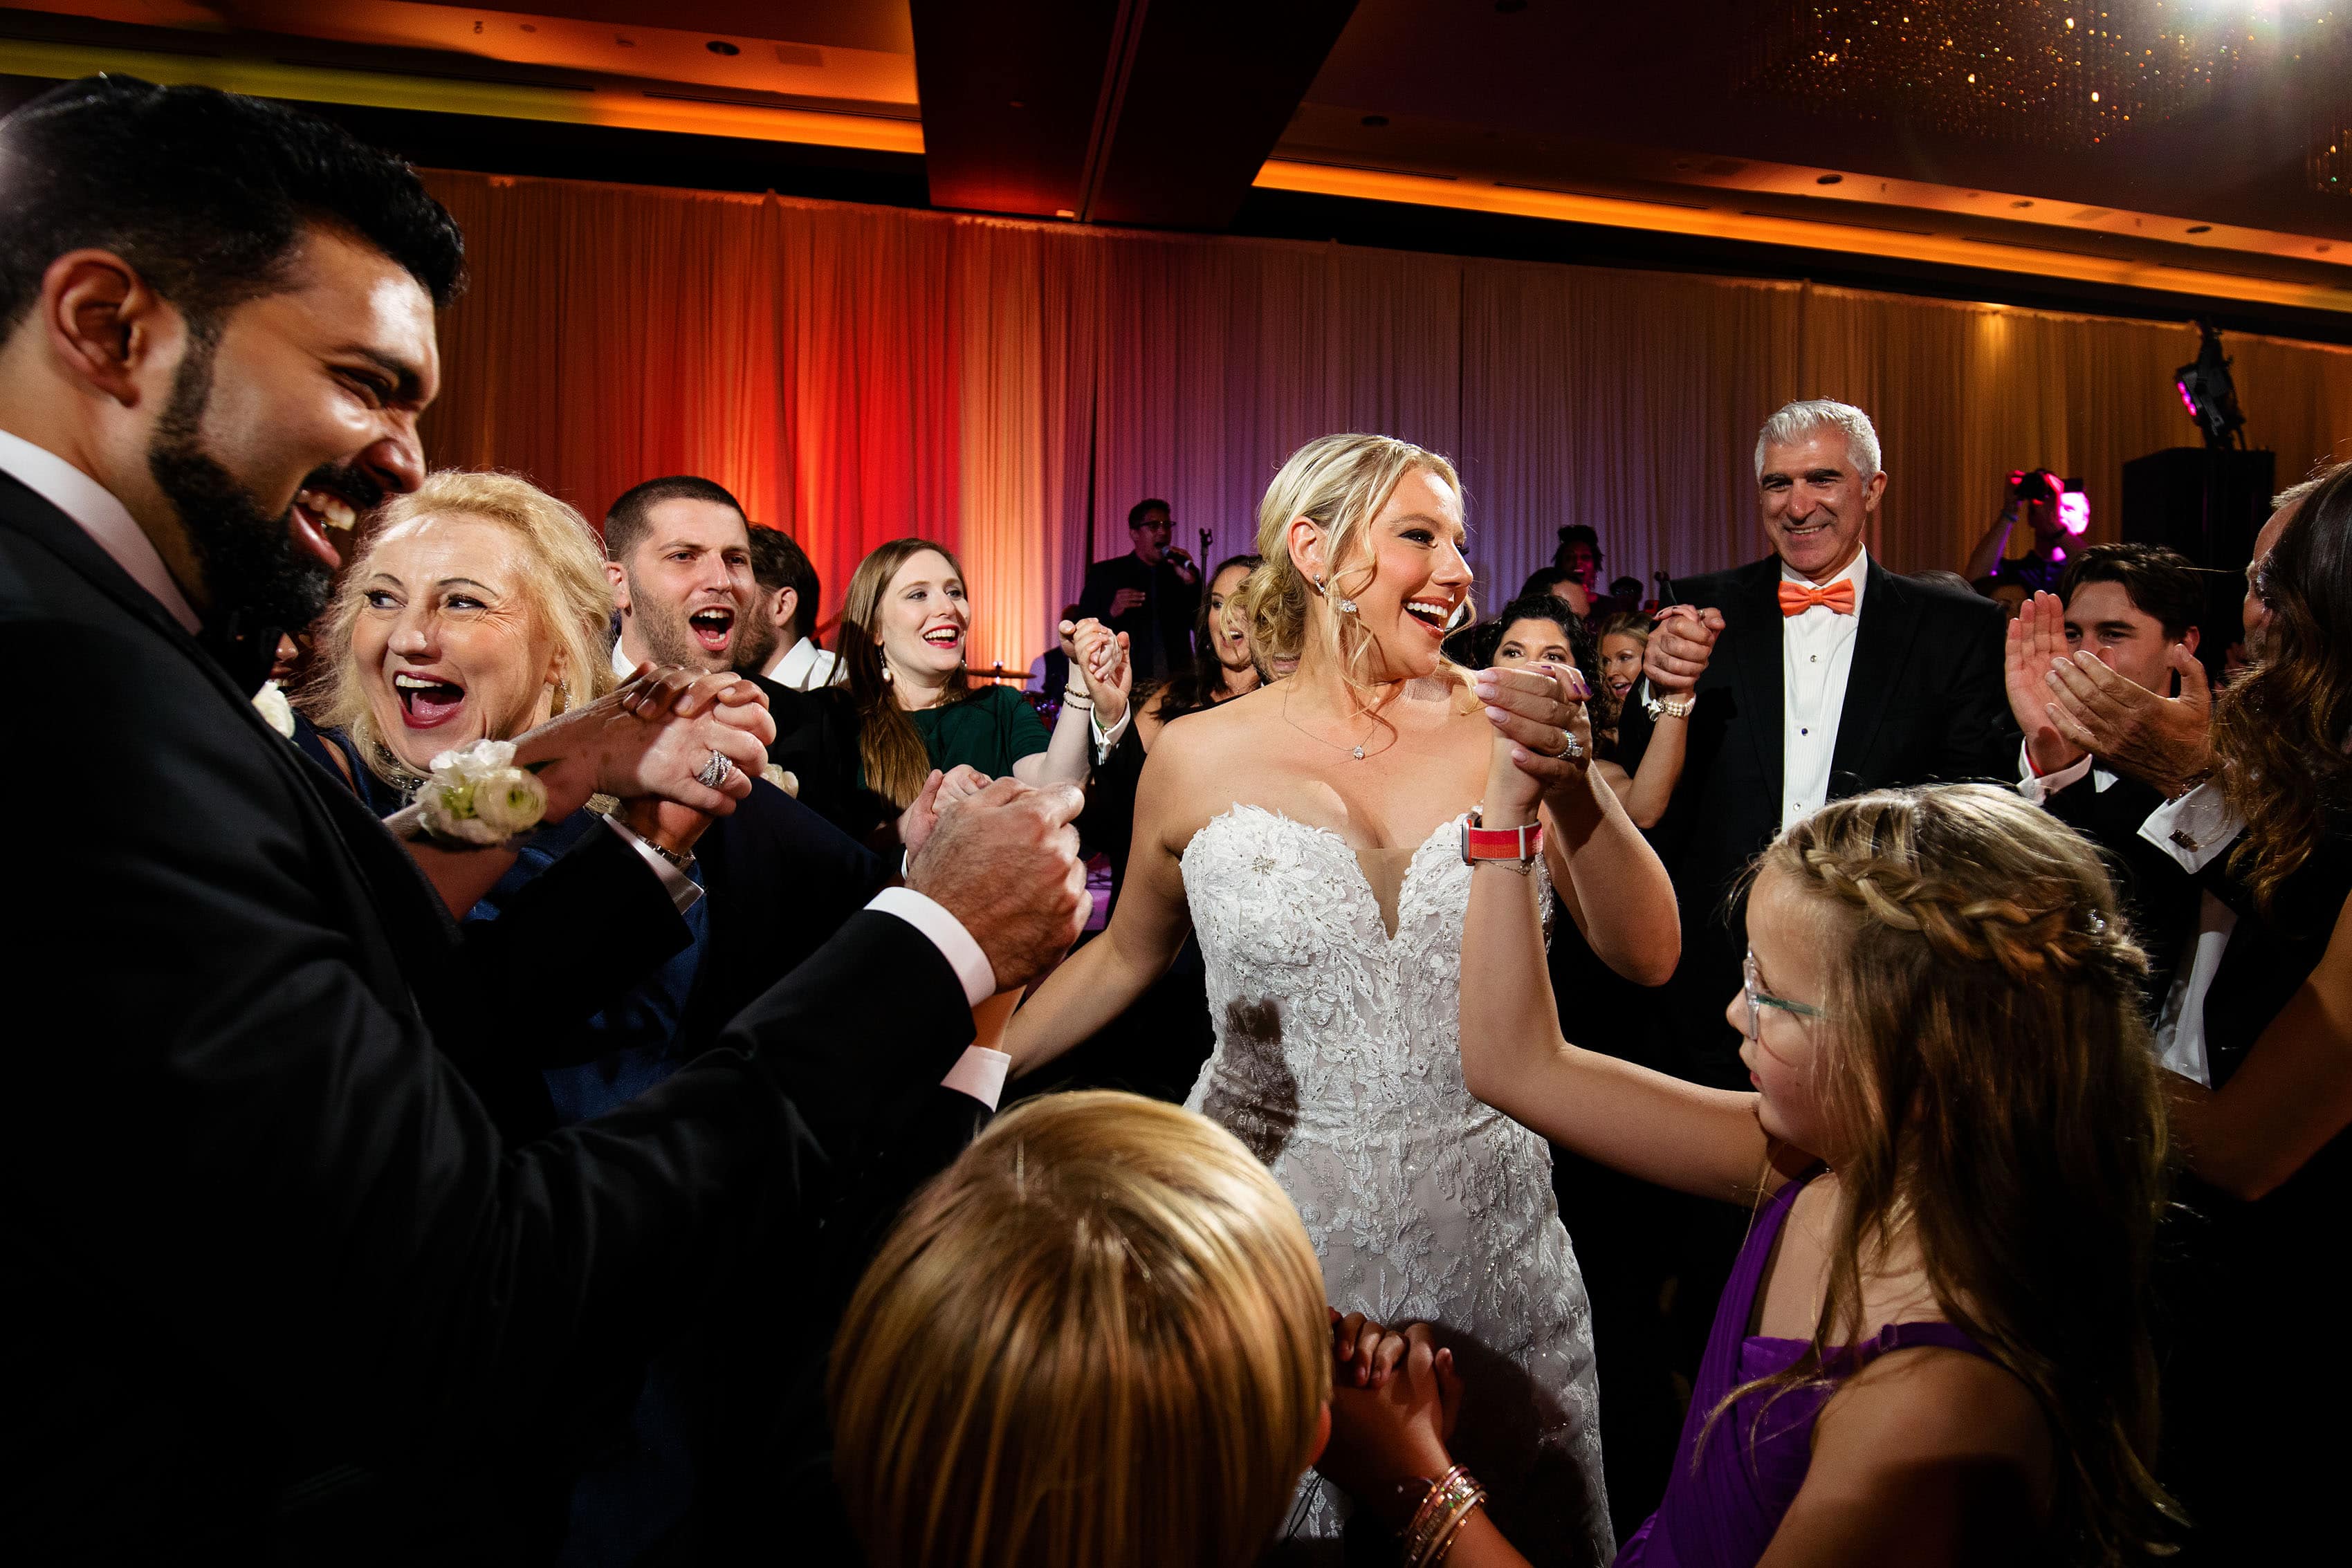 The couple dances with family members at their ballroom reception